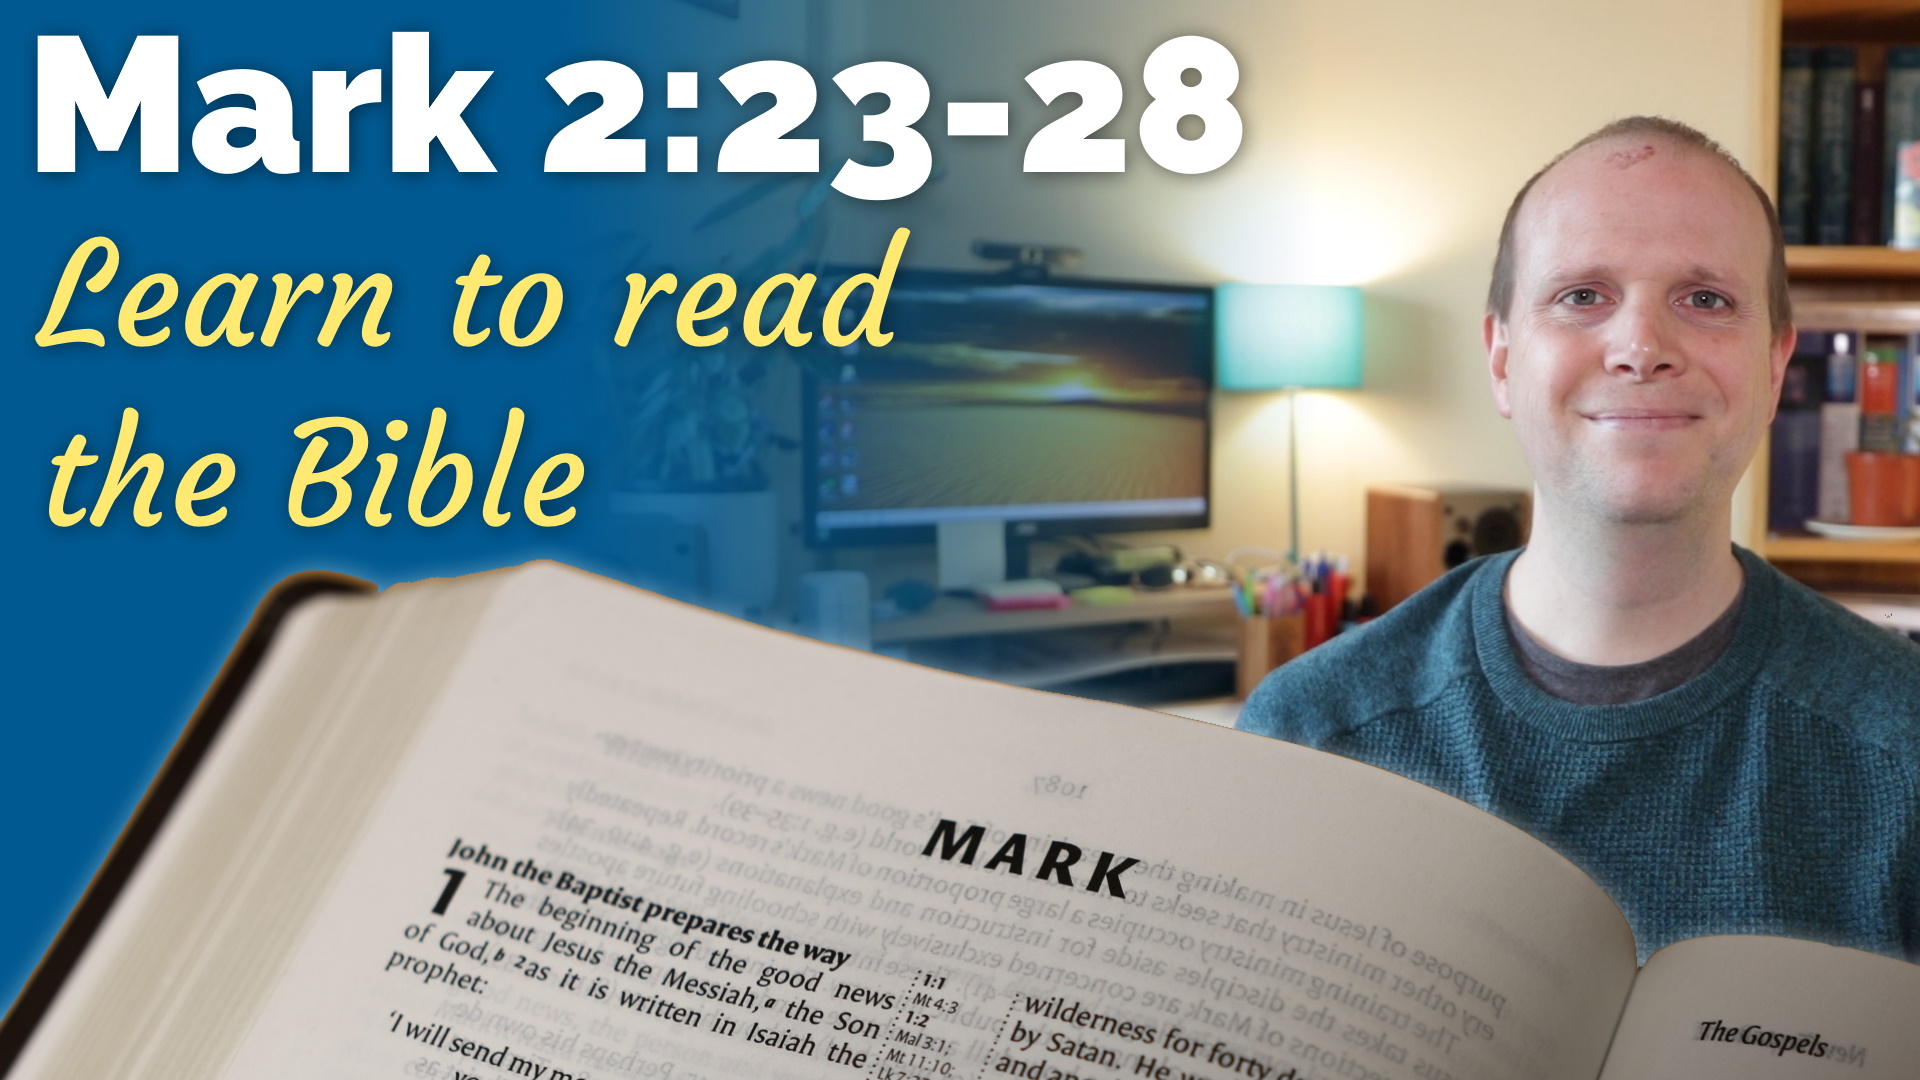 Mark 2:23-28 – Learn to read the Bible #9